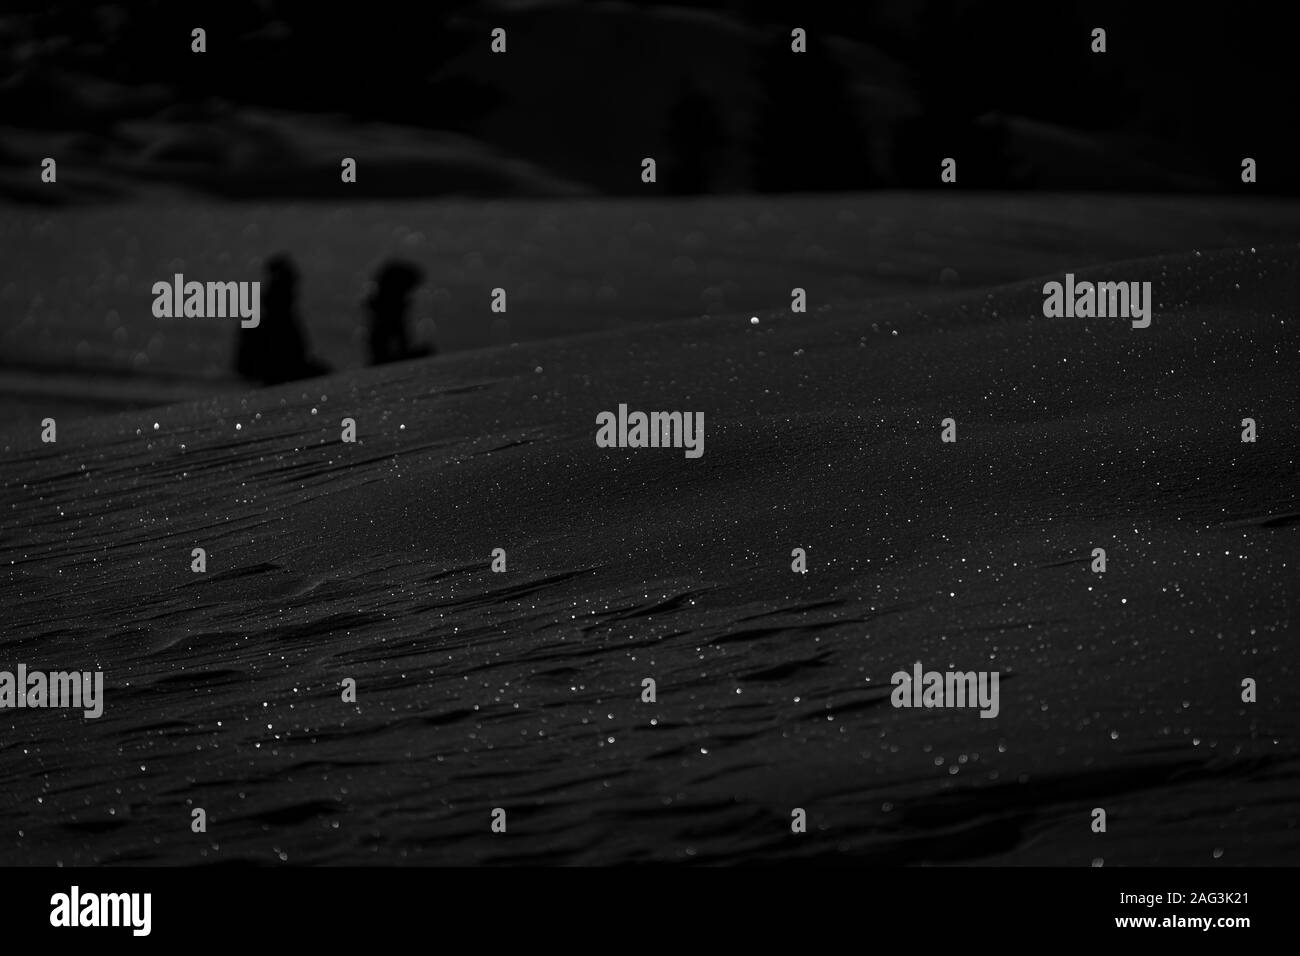 Starry desert, unknown planet, mystery place, black place Stock Photo